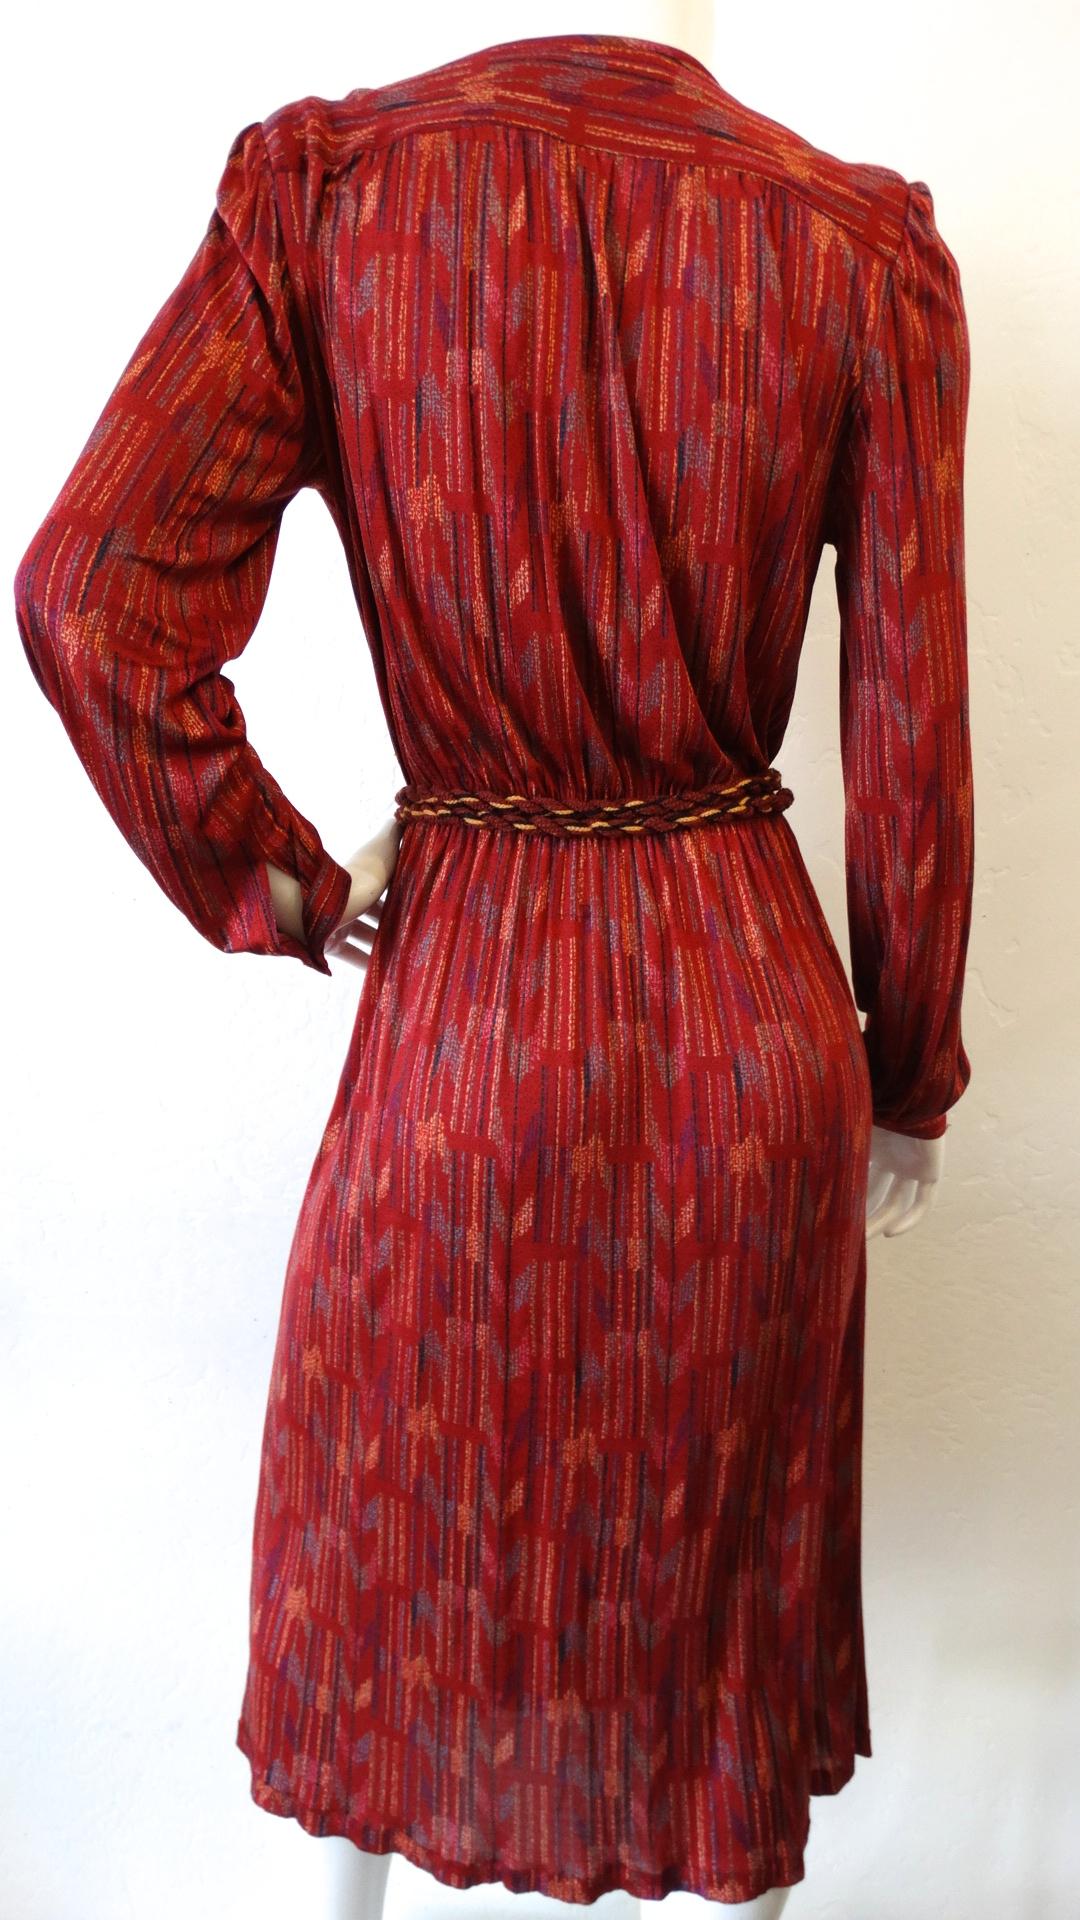 Your Perfect Fall and Holiday Dress Has Arrived-with our silk Missoni wrap dress circa 1970s! Featuring a rich cherry red color which stands out against the unique and colorful abstract tribal inspired print. Features cuff sleeves and strong